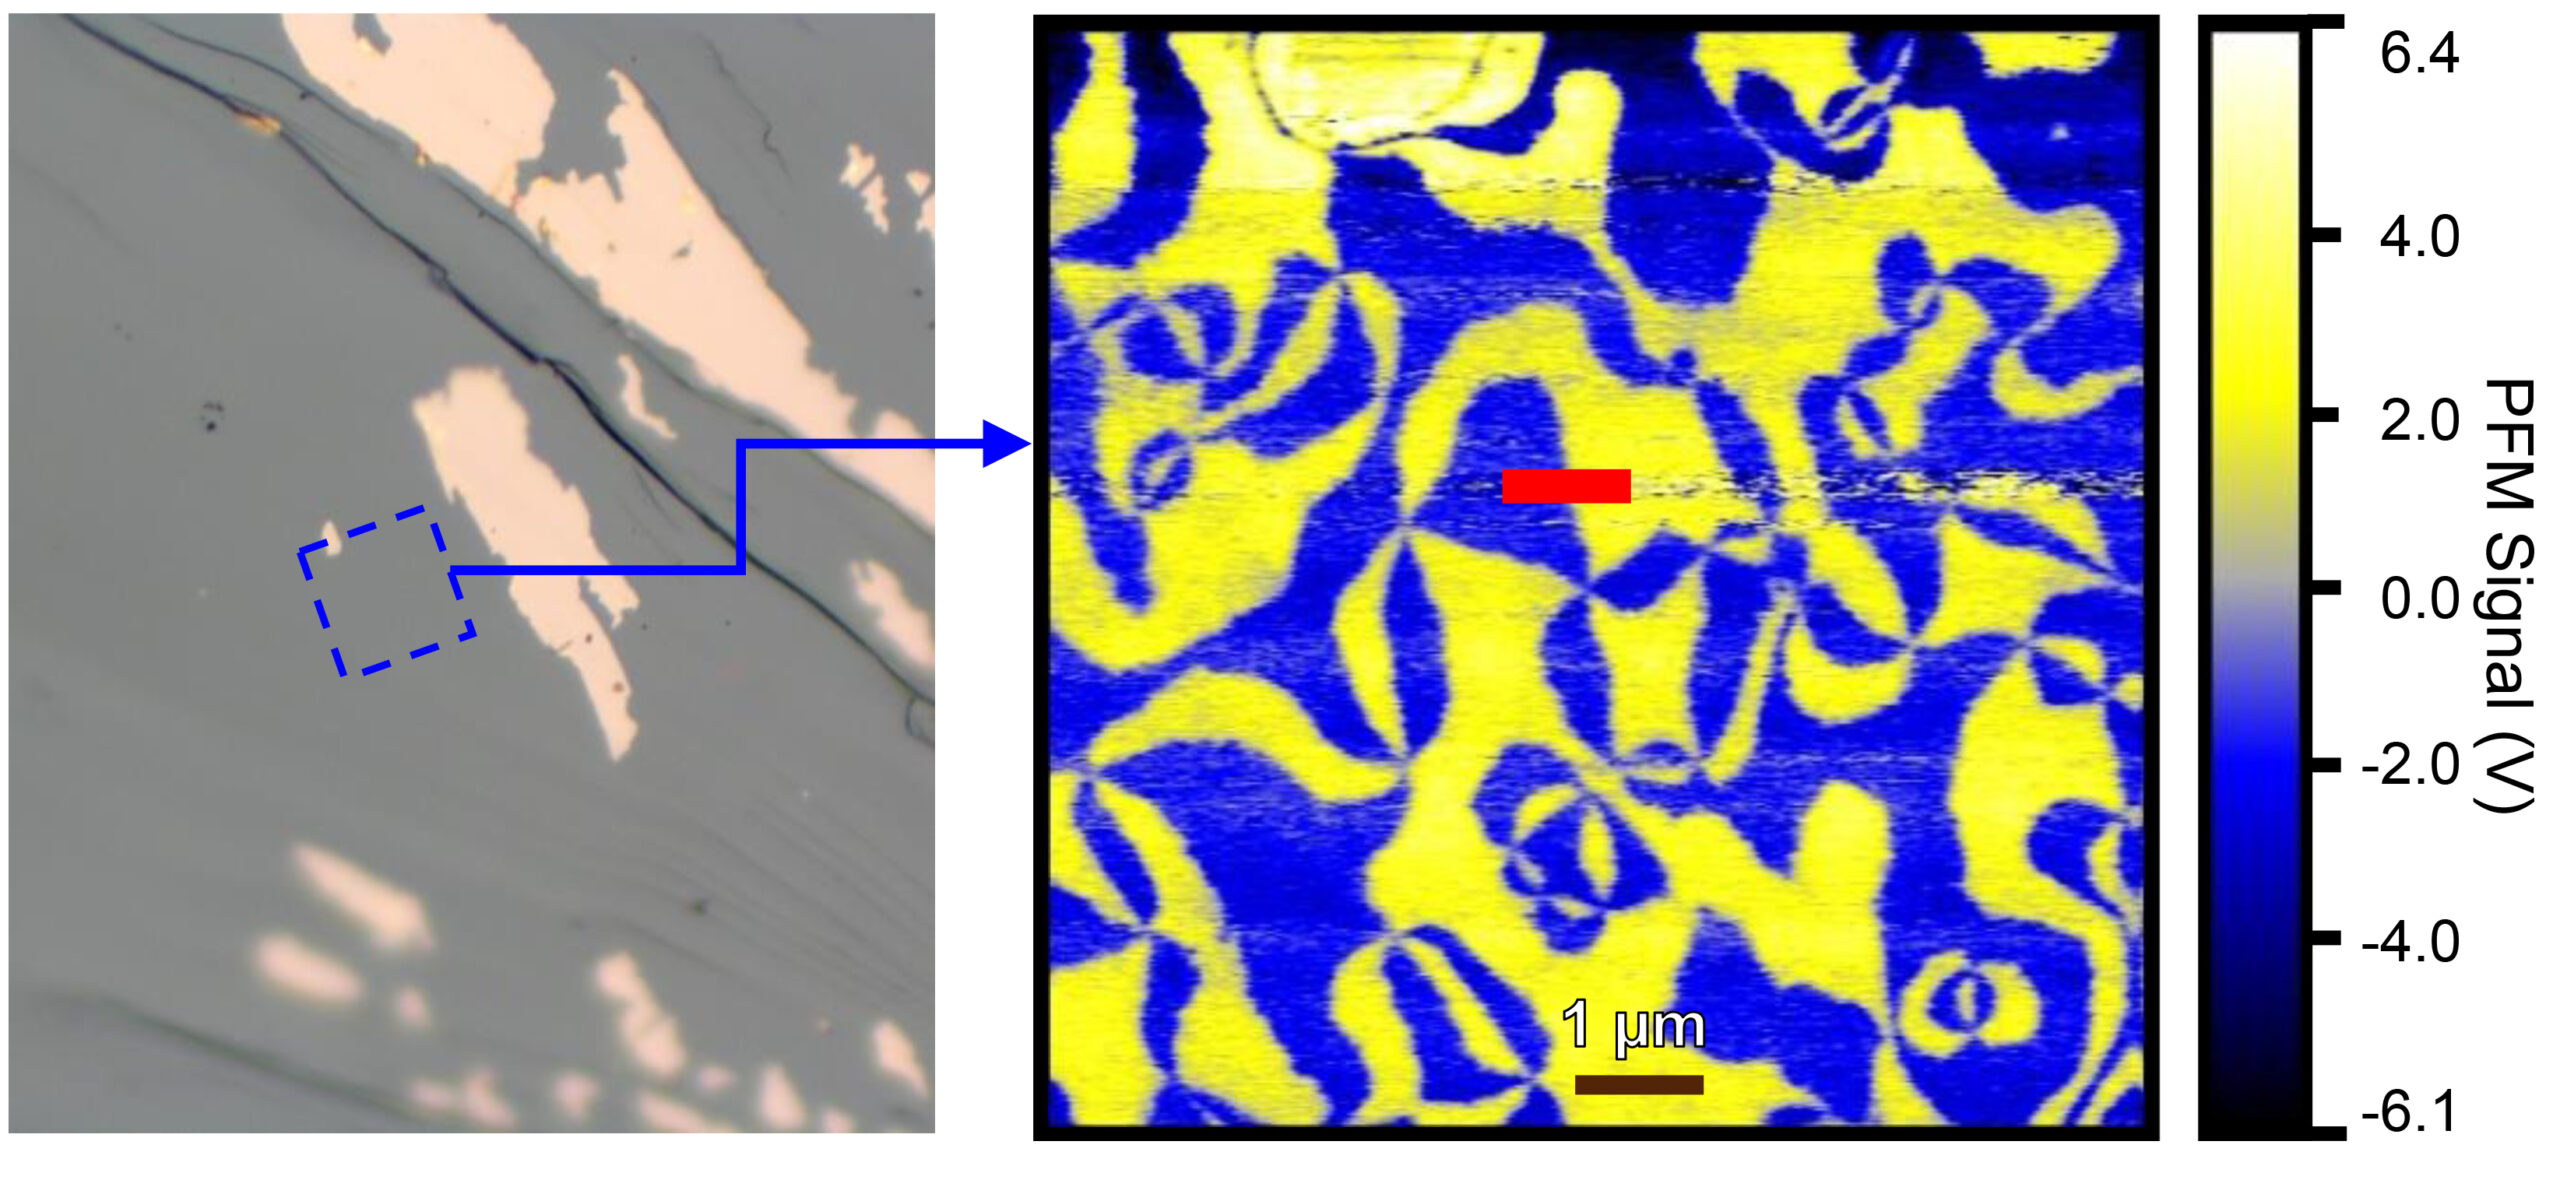 Left: Microscopy image shows a mostly gray surface with a few beige spots. Right: Blue and yellow ferroelectric domains with swirling vortex-like shapes. A red bar shows scan path across domain boundary.